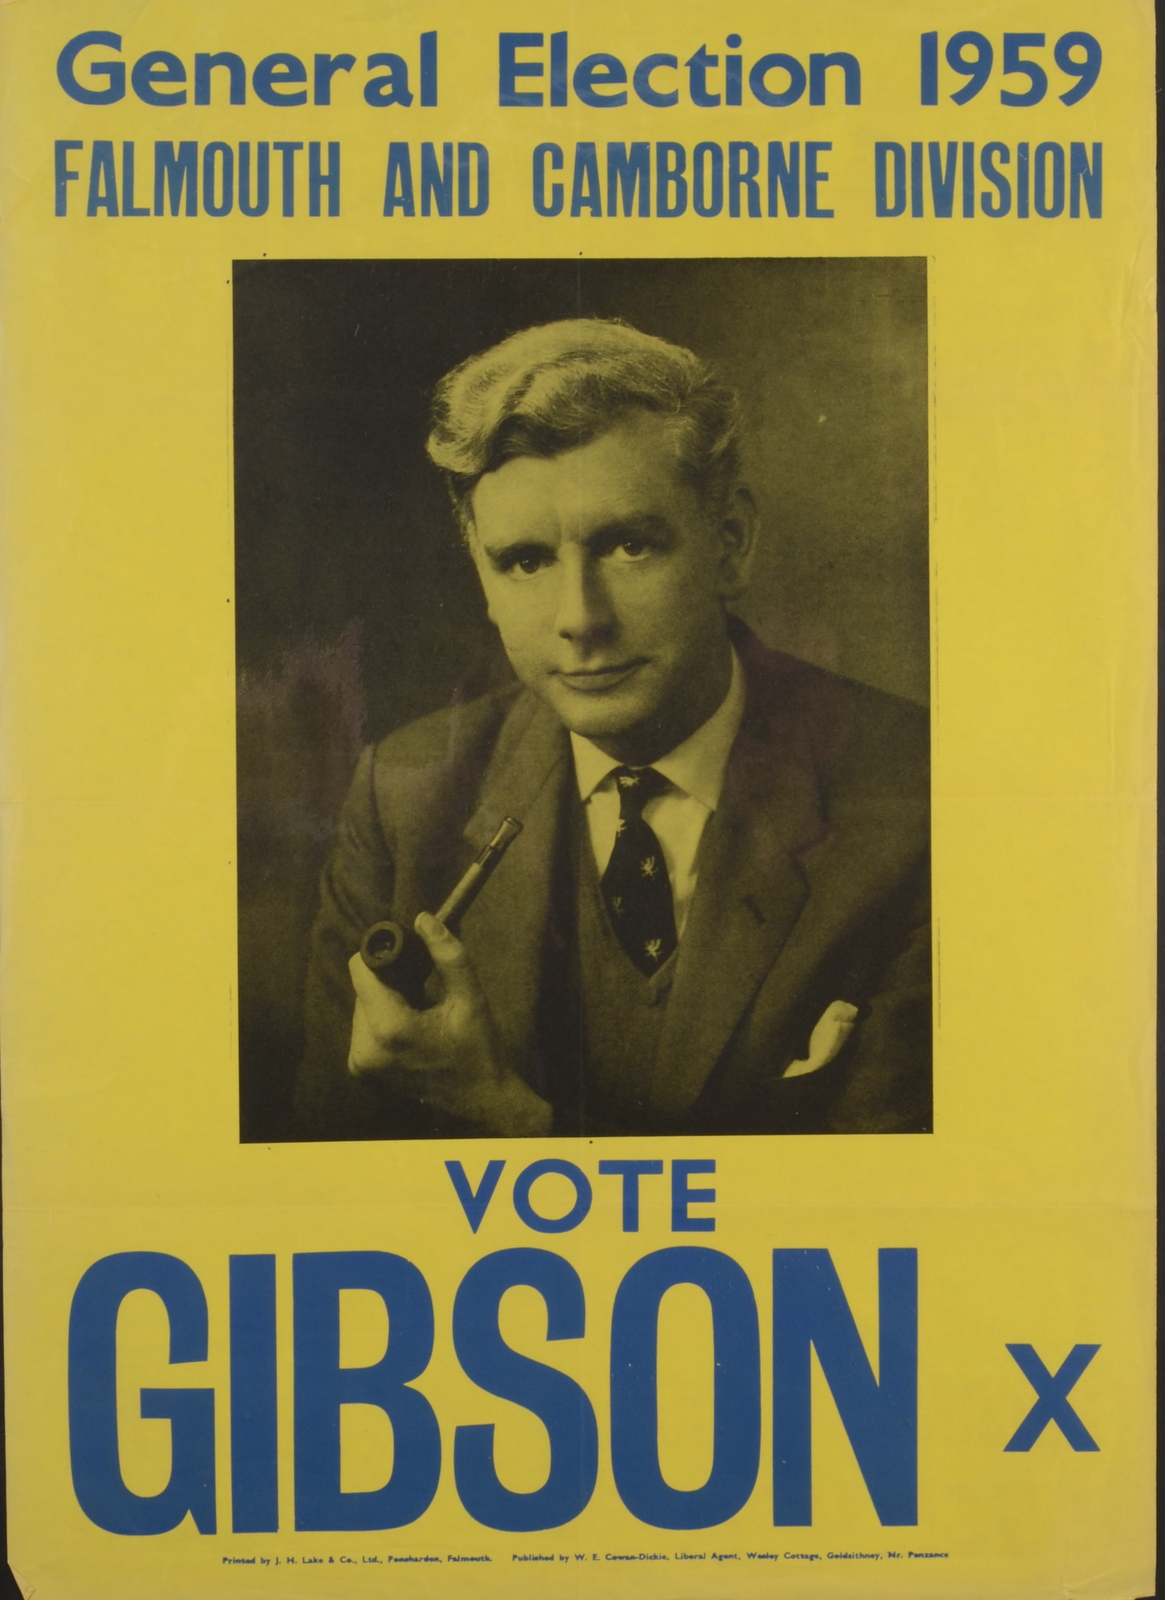 Cornish Political Posters 5 pieces 76 x 51cm - Image 2 of 5